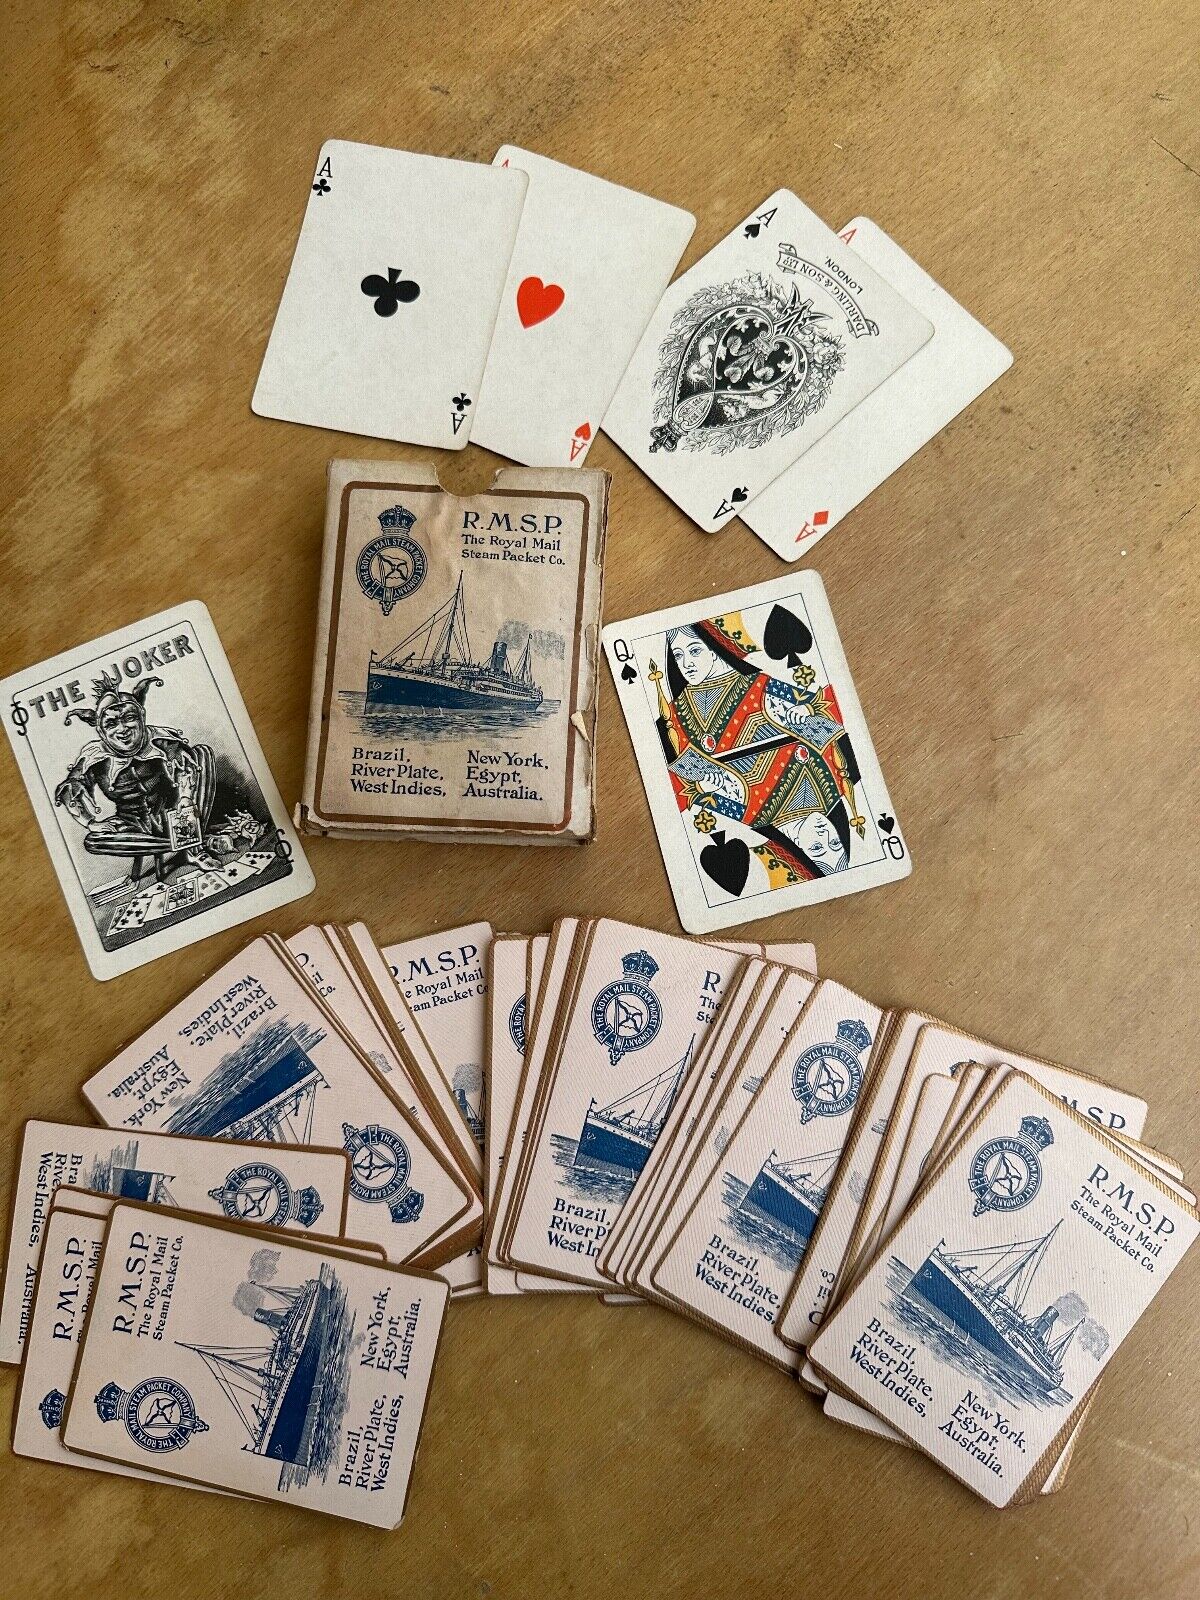 antique and rare playing cards deck 19th century  Ship - R.M.S.P.